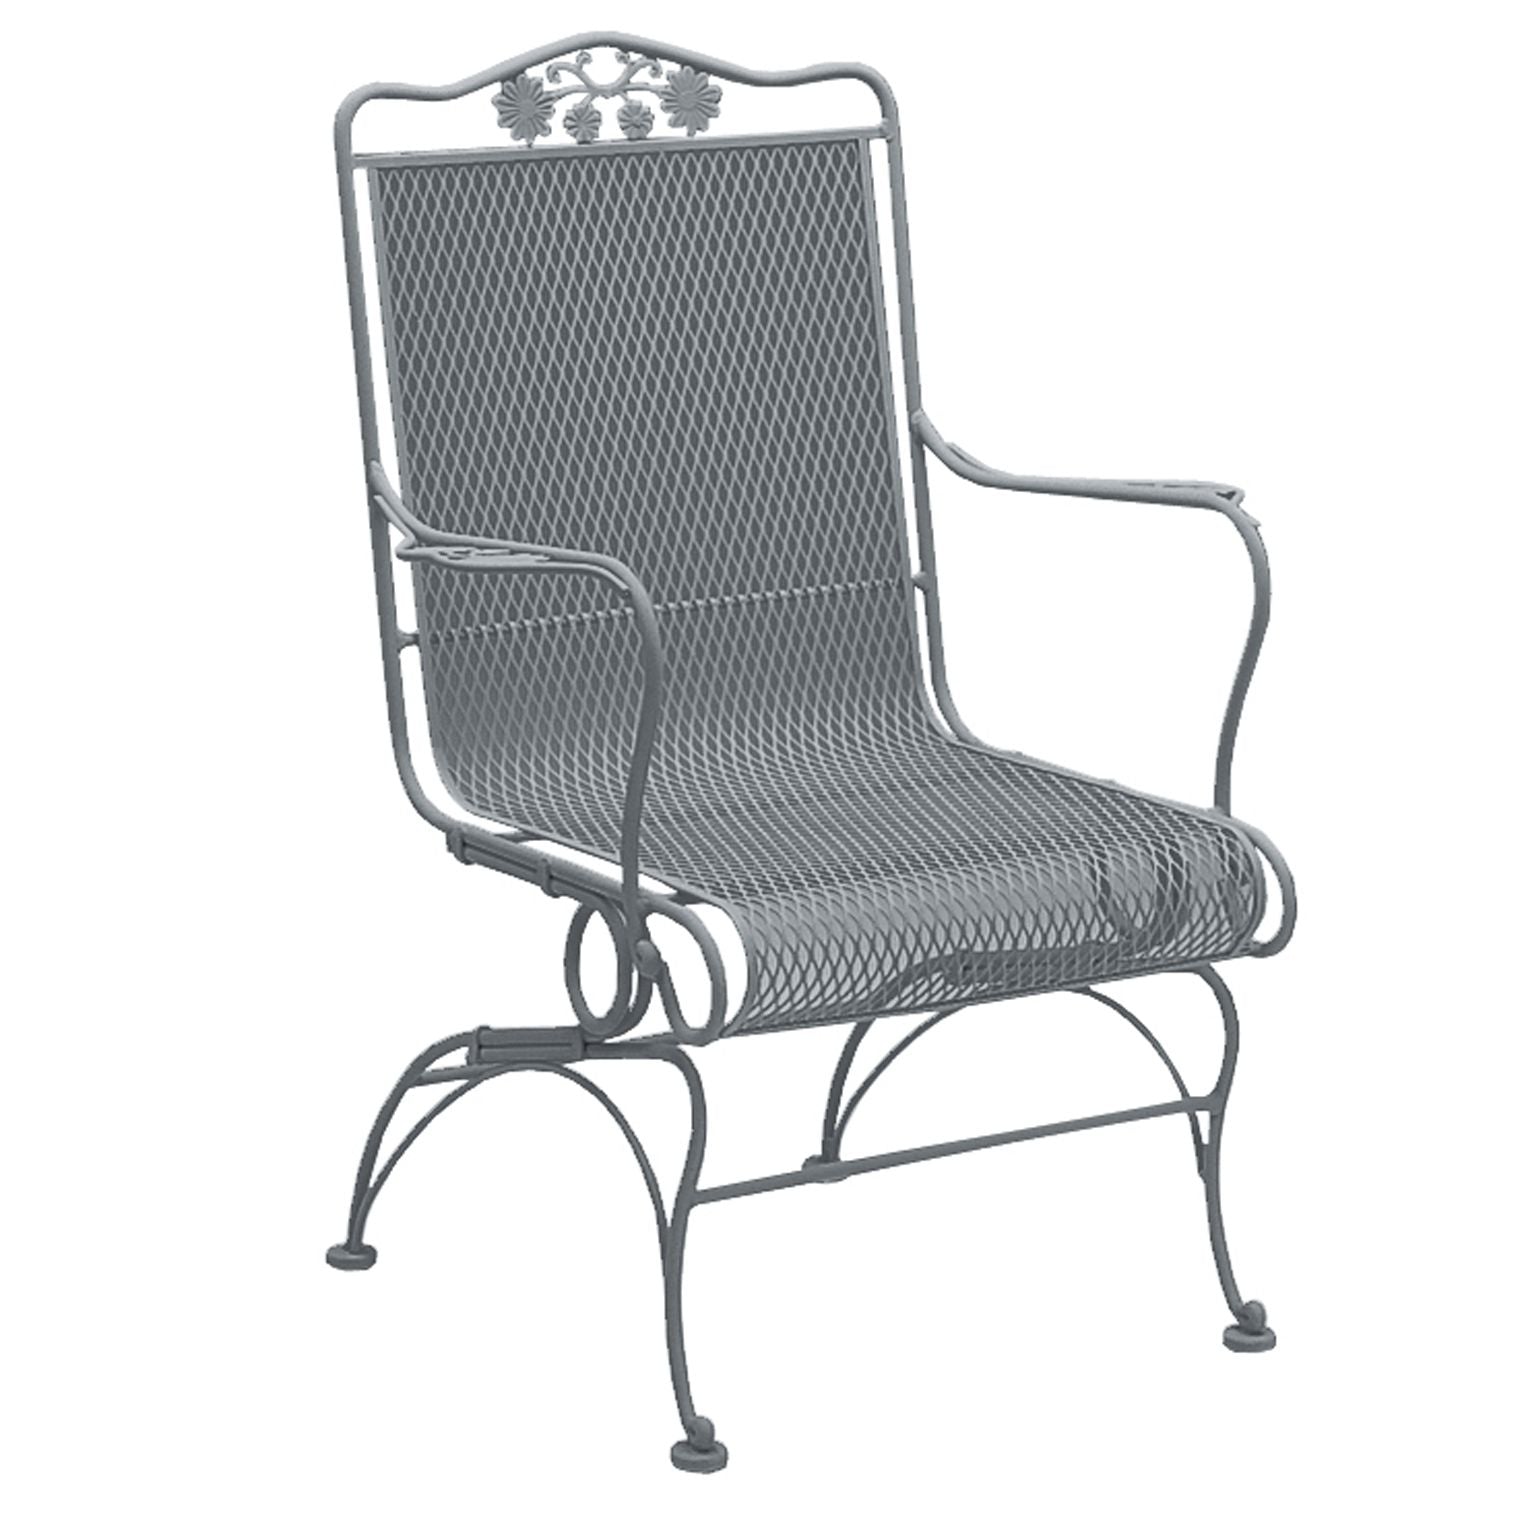 Briarwood High-Back Coil Spring Chair By Woodard